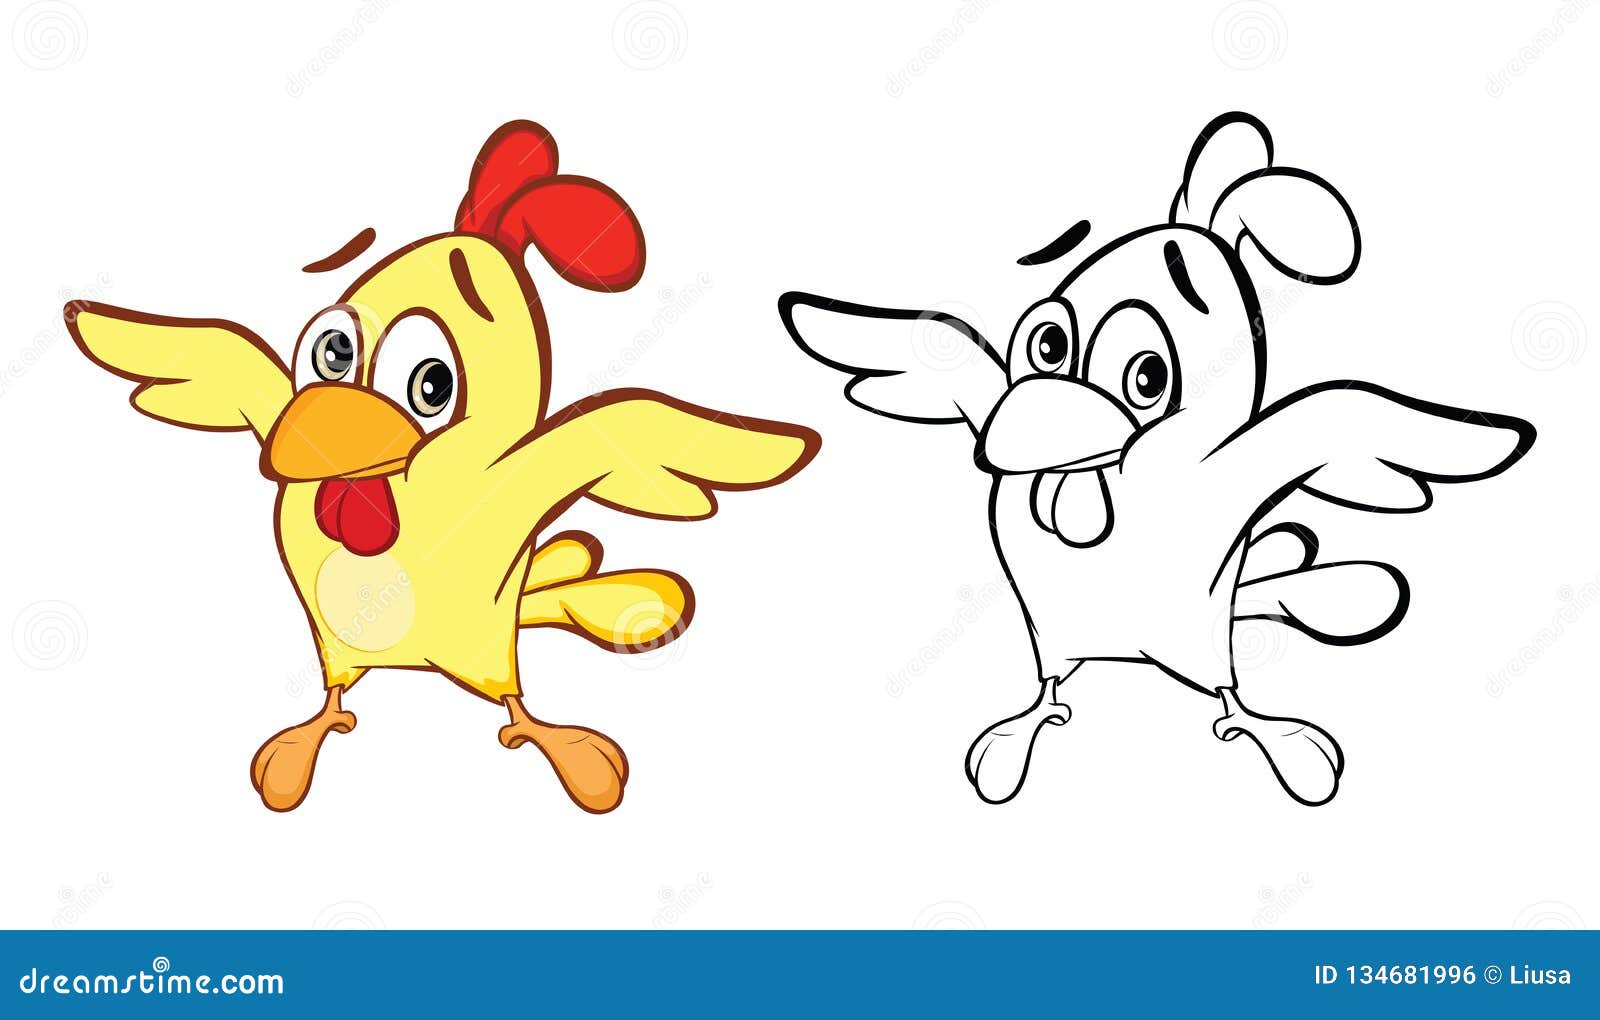 Running Chicken Little And Abby Coloring Page for Kids - Free Chicken Little  Printable Coloring Pages Online for Kids - ColoringPages101.com | Coloring  Pages for Kids